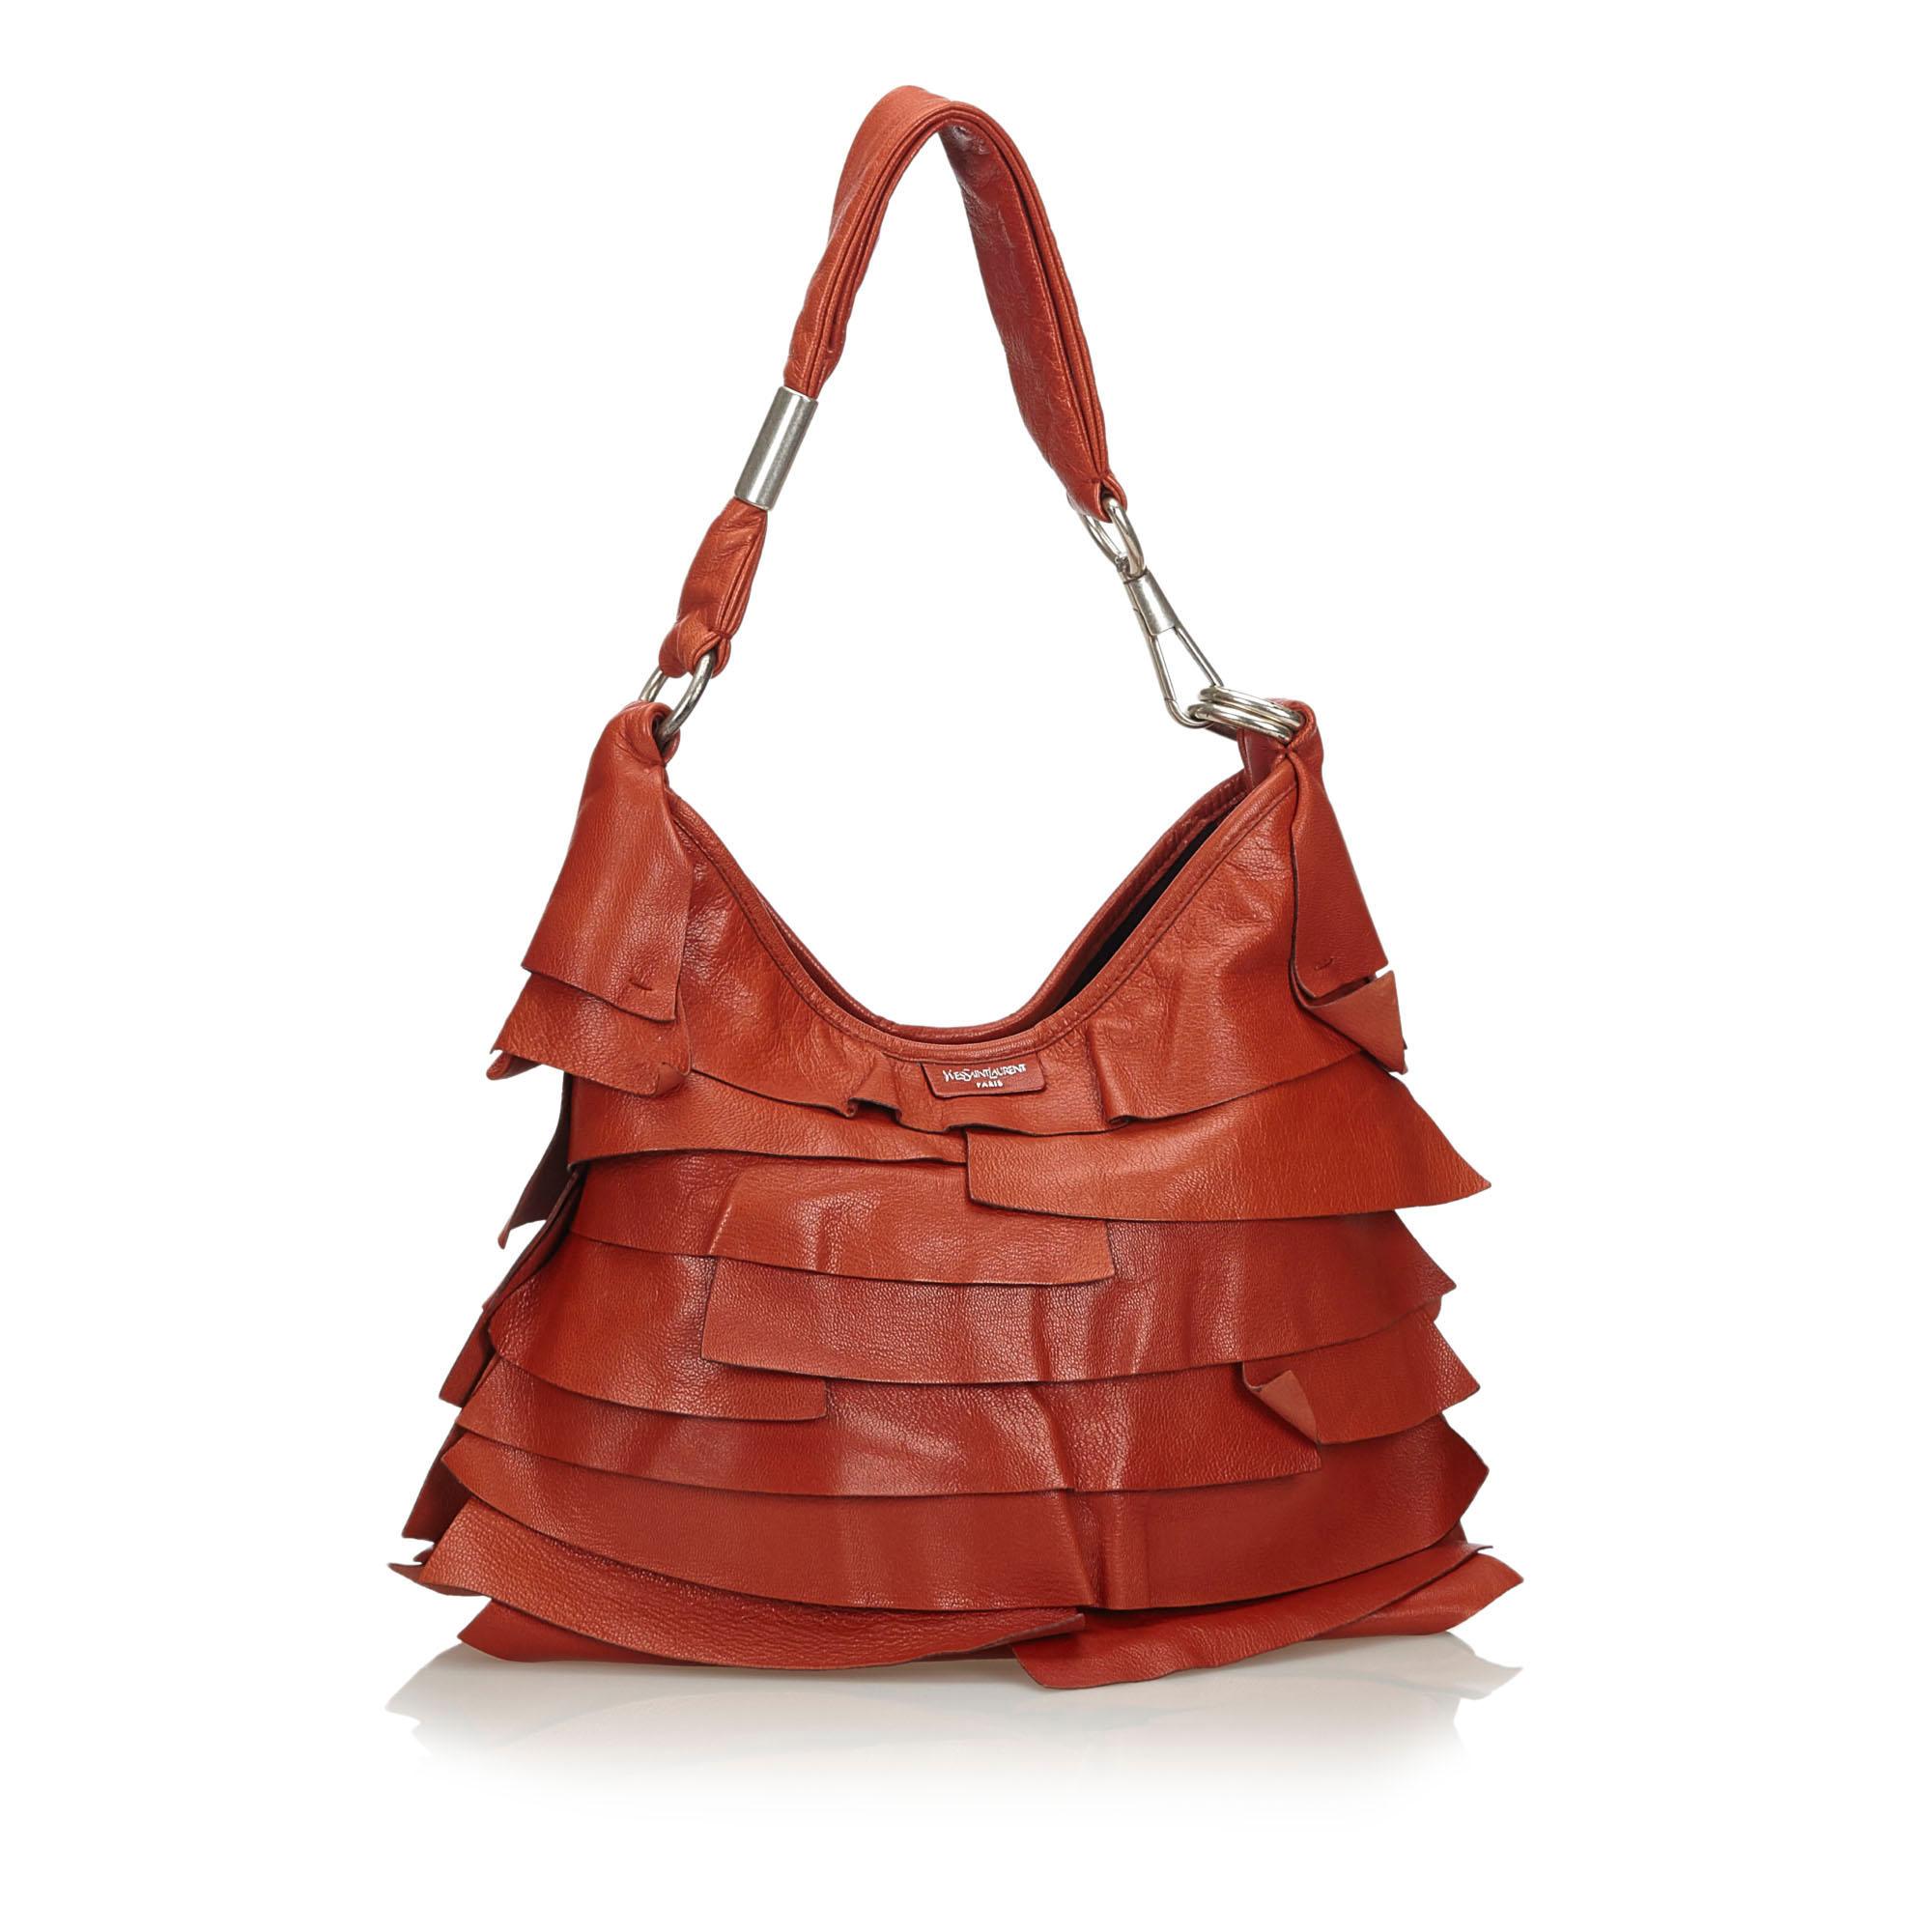 The Saint Tropez features a ruffled leather body, a flat leather strap, a top magnetic closure, and interior zip and slip pockets. It carries as B+ condition rating.

Inclusions: 
This item does not come with inclusions.

Dimensions:
Length: 29.00